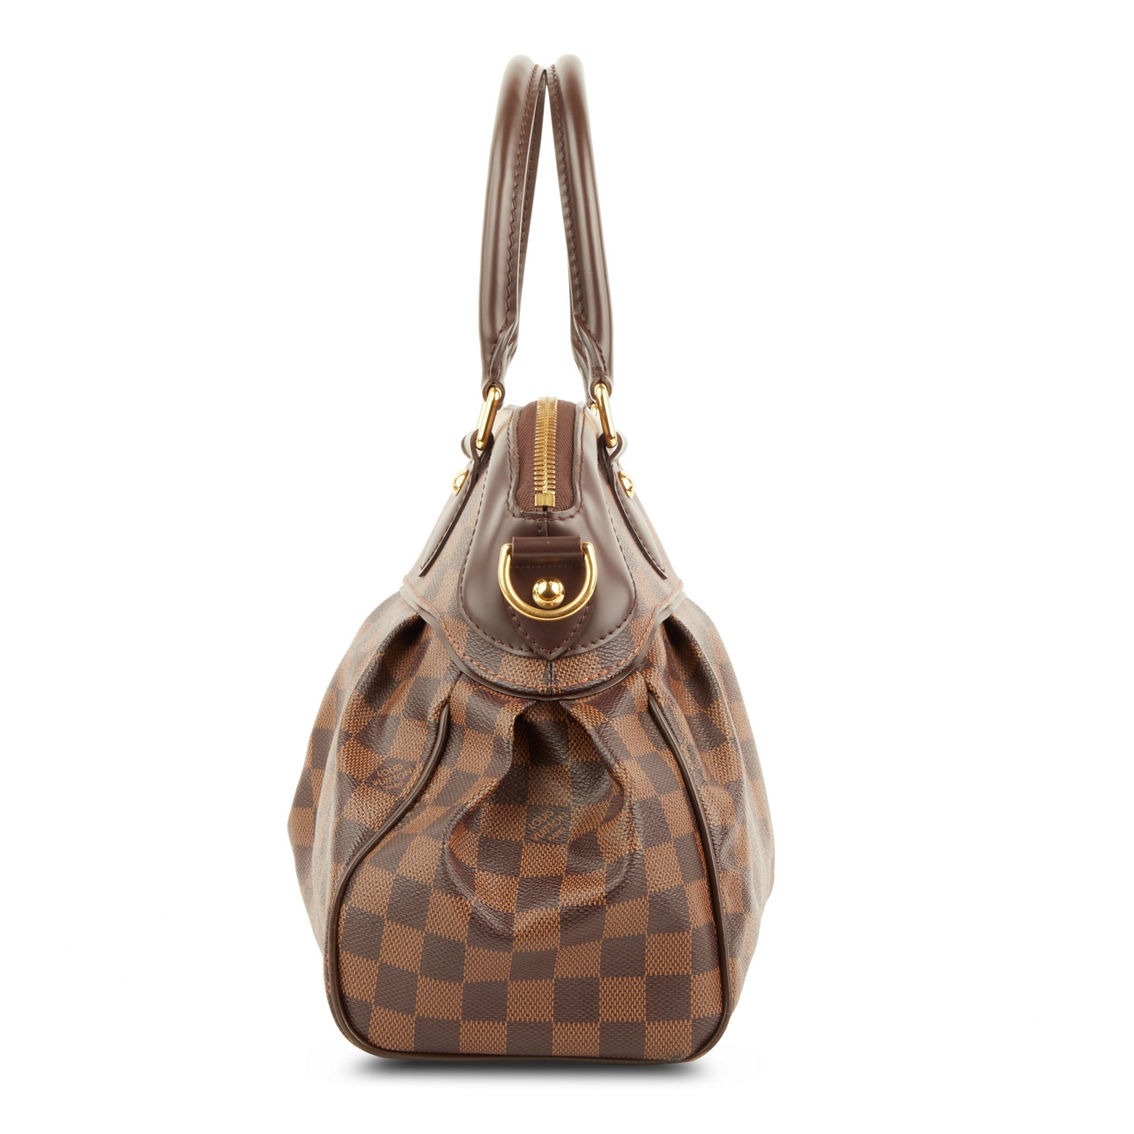 Louis Vuitton Trevi PM Damier Ebene (Pre-Owned) - Image 2 of 5